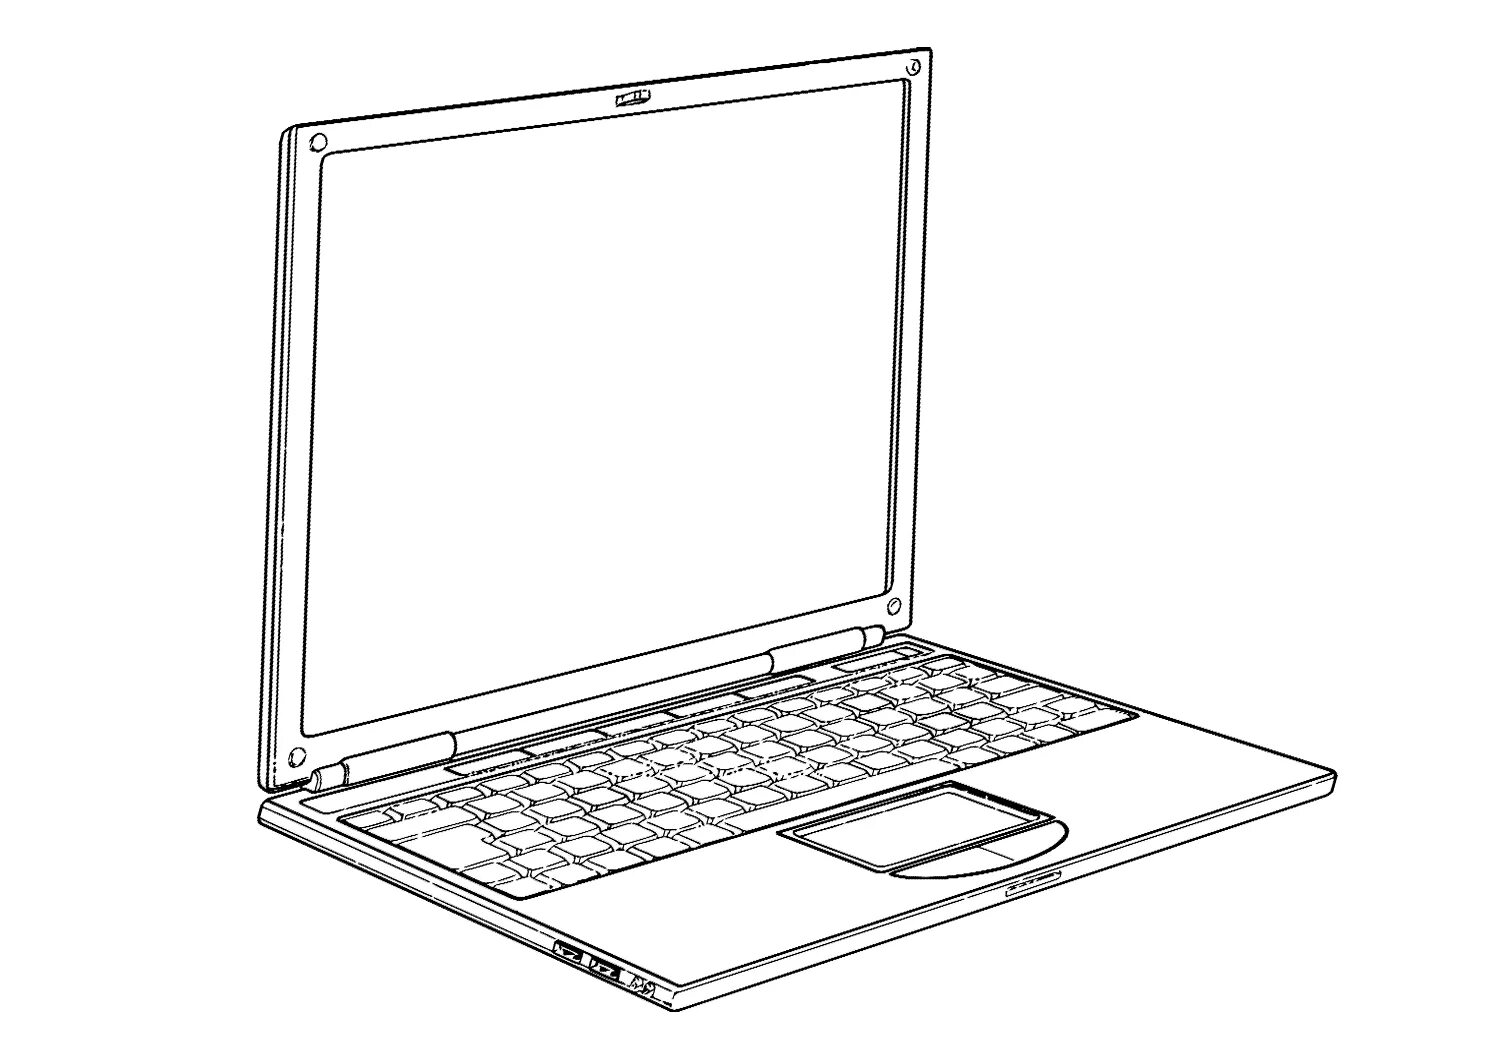 Creative computer and phone coloring book